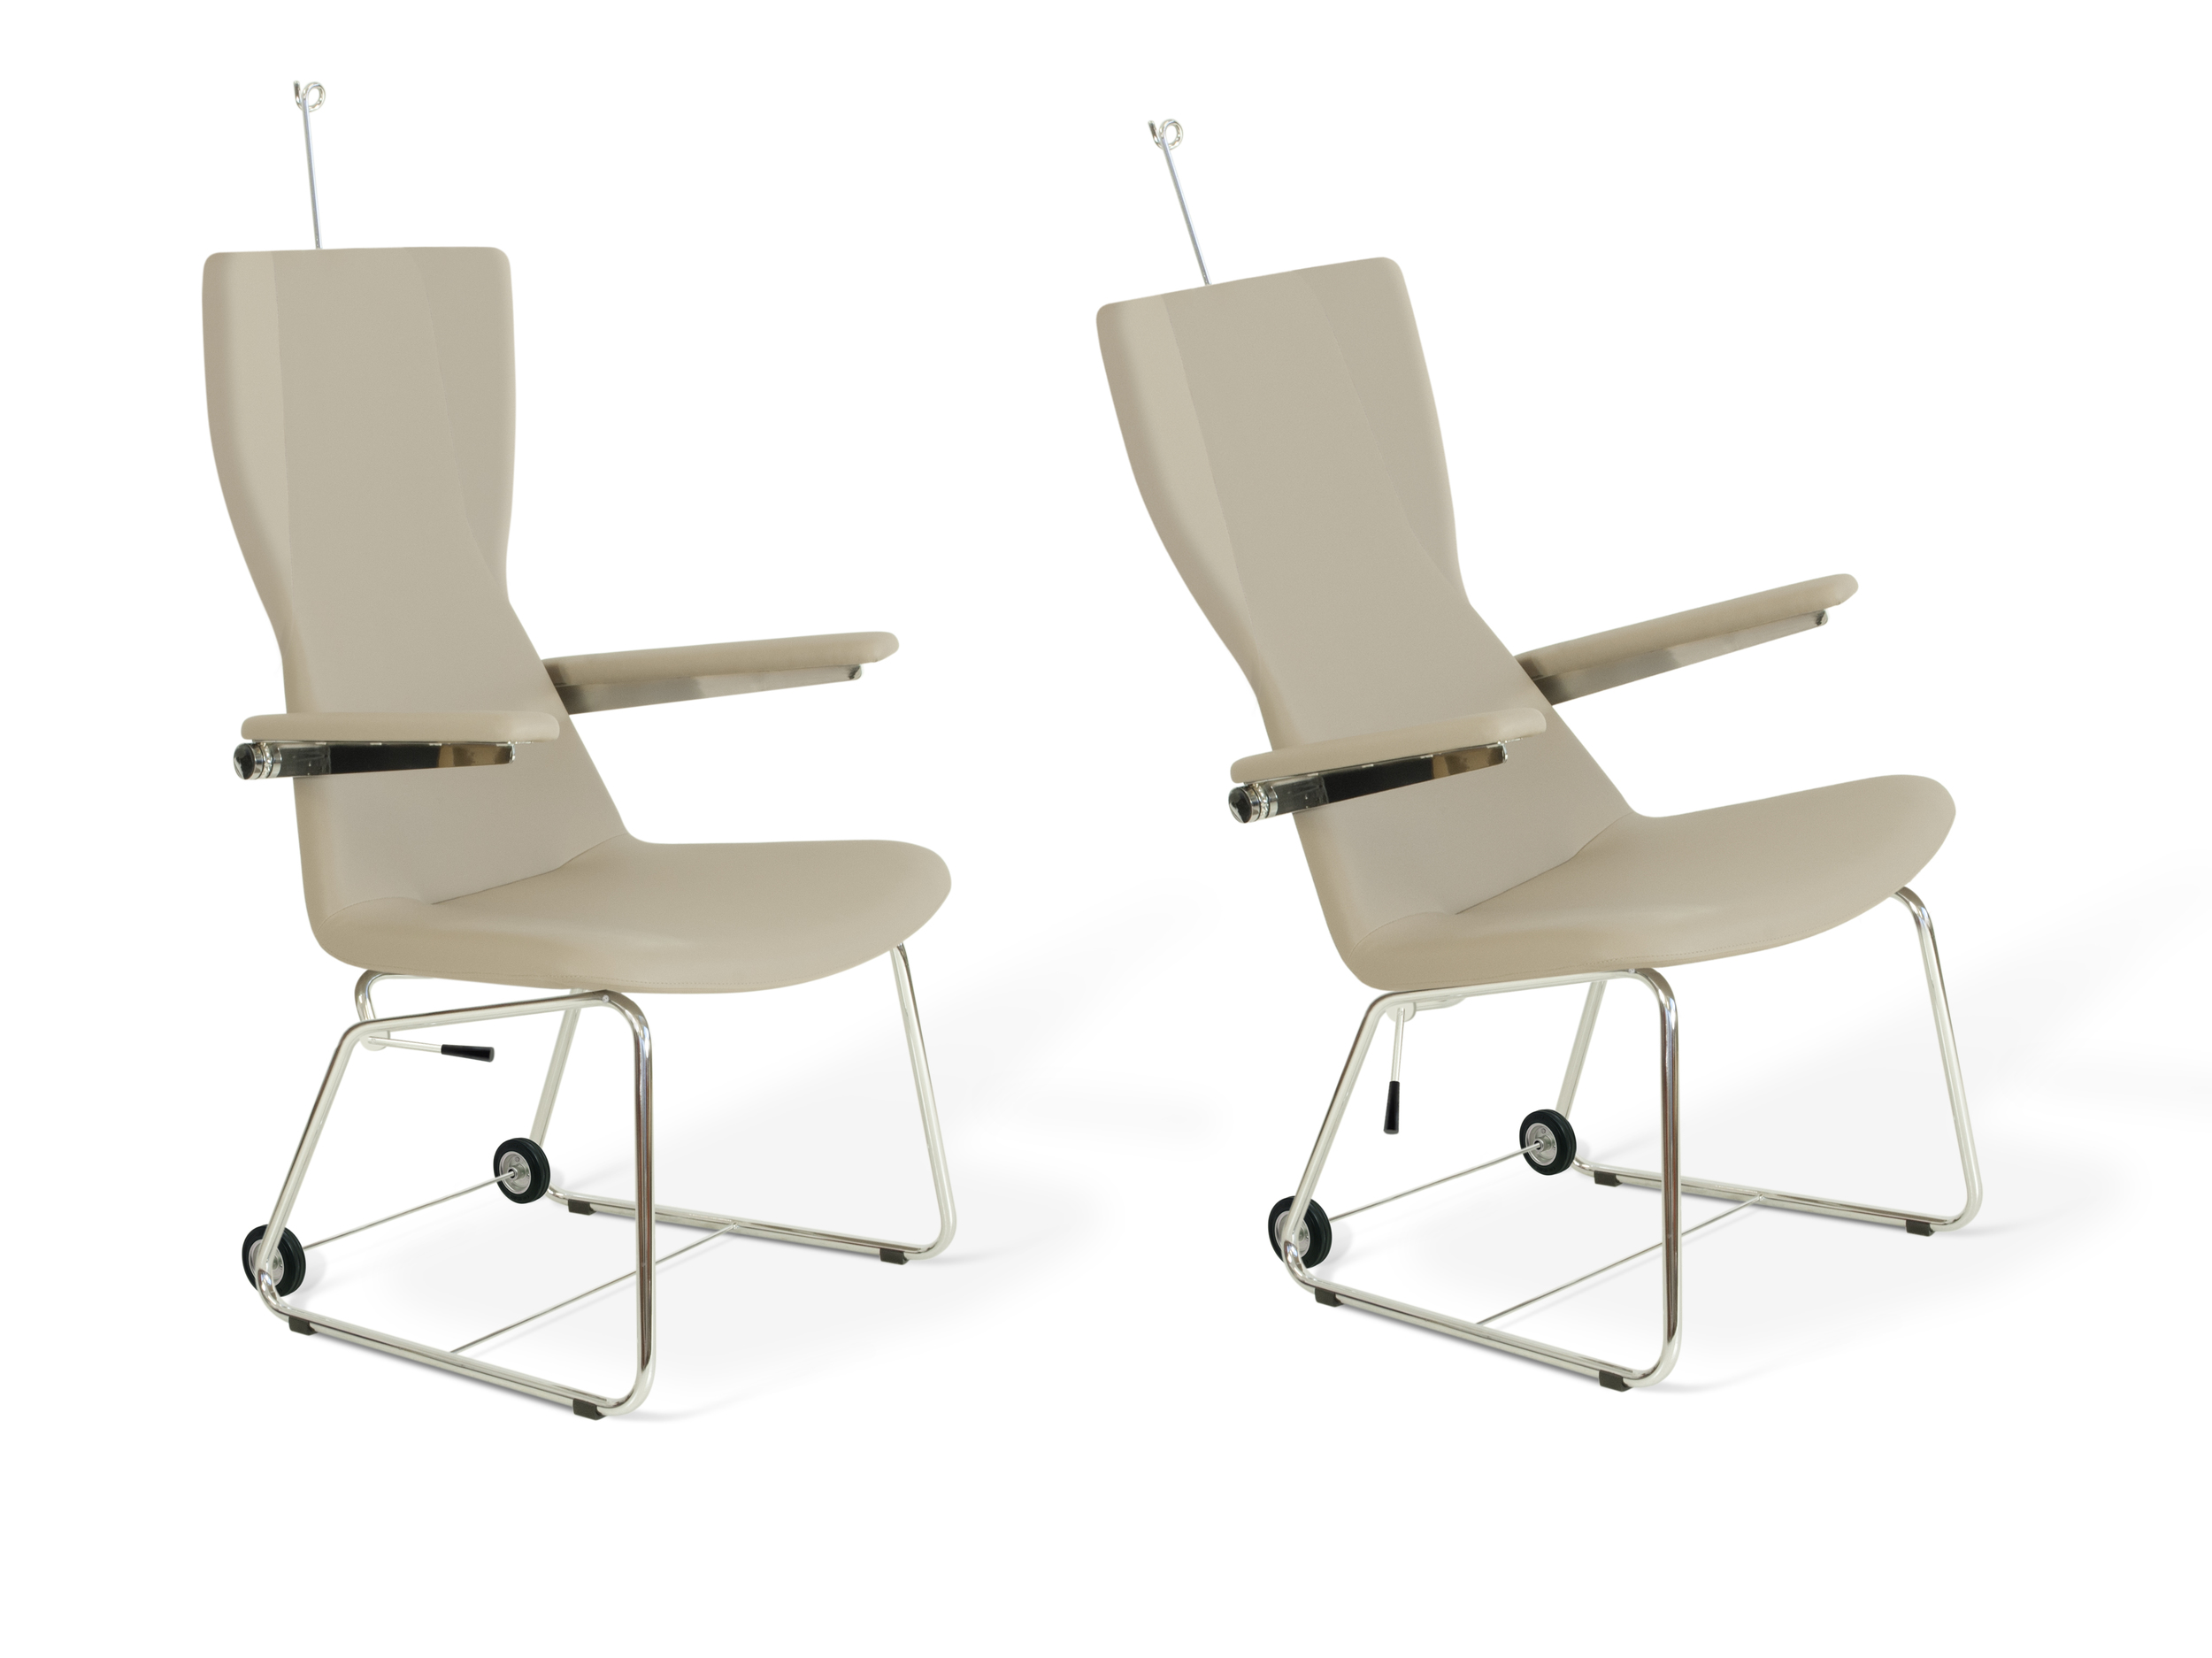 hm59 hospital chair with head rest and wheels.jpg